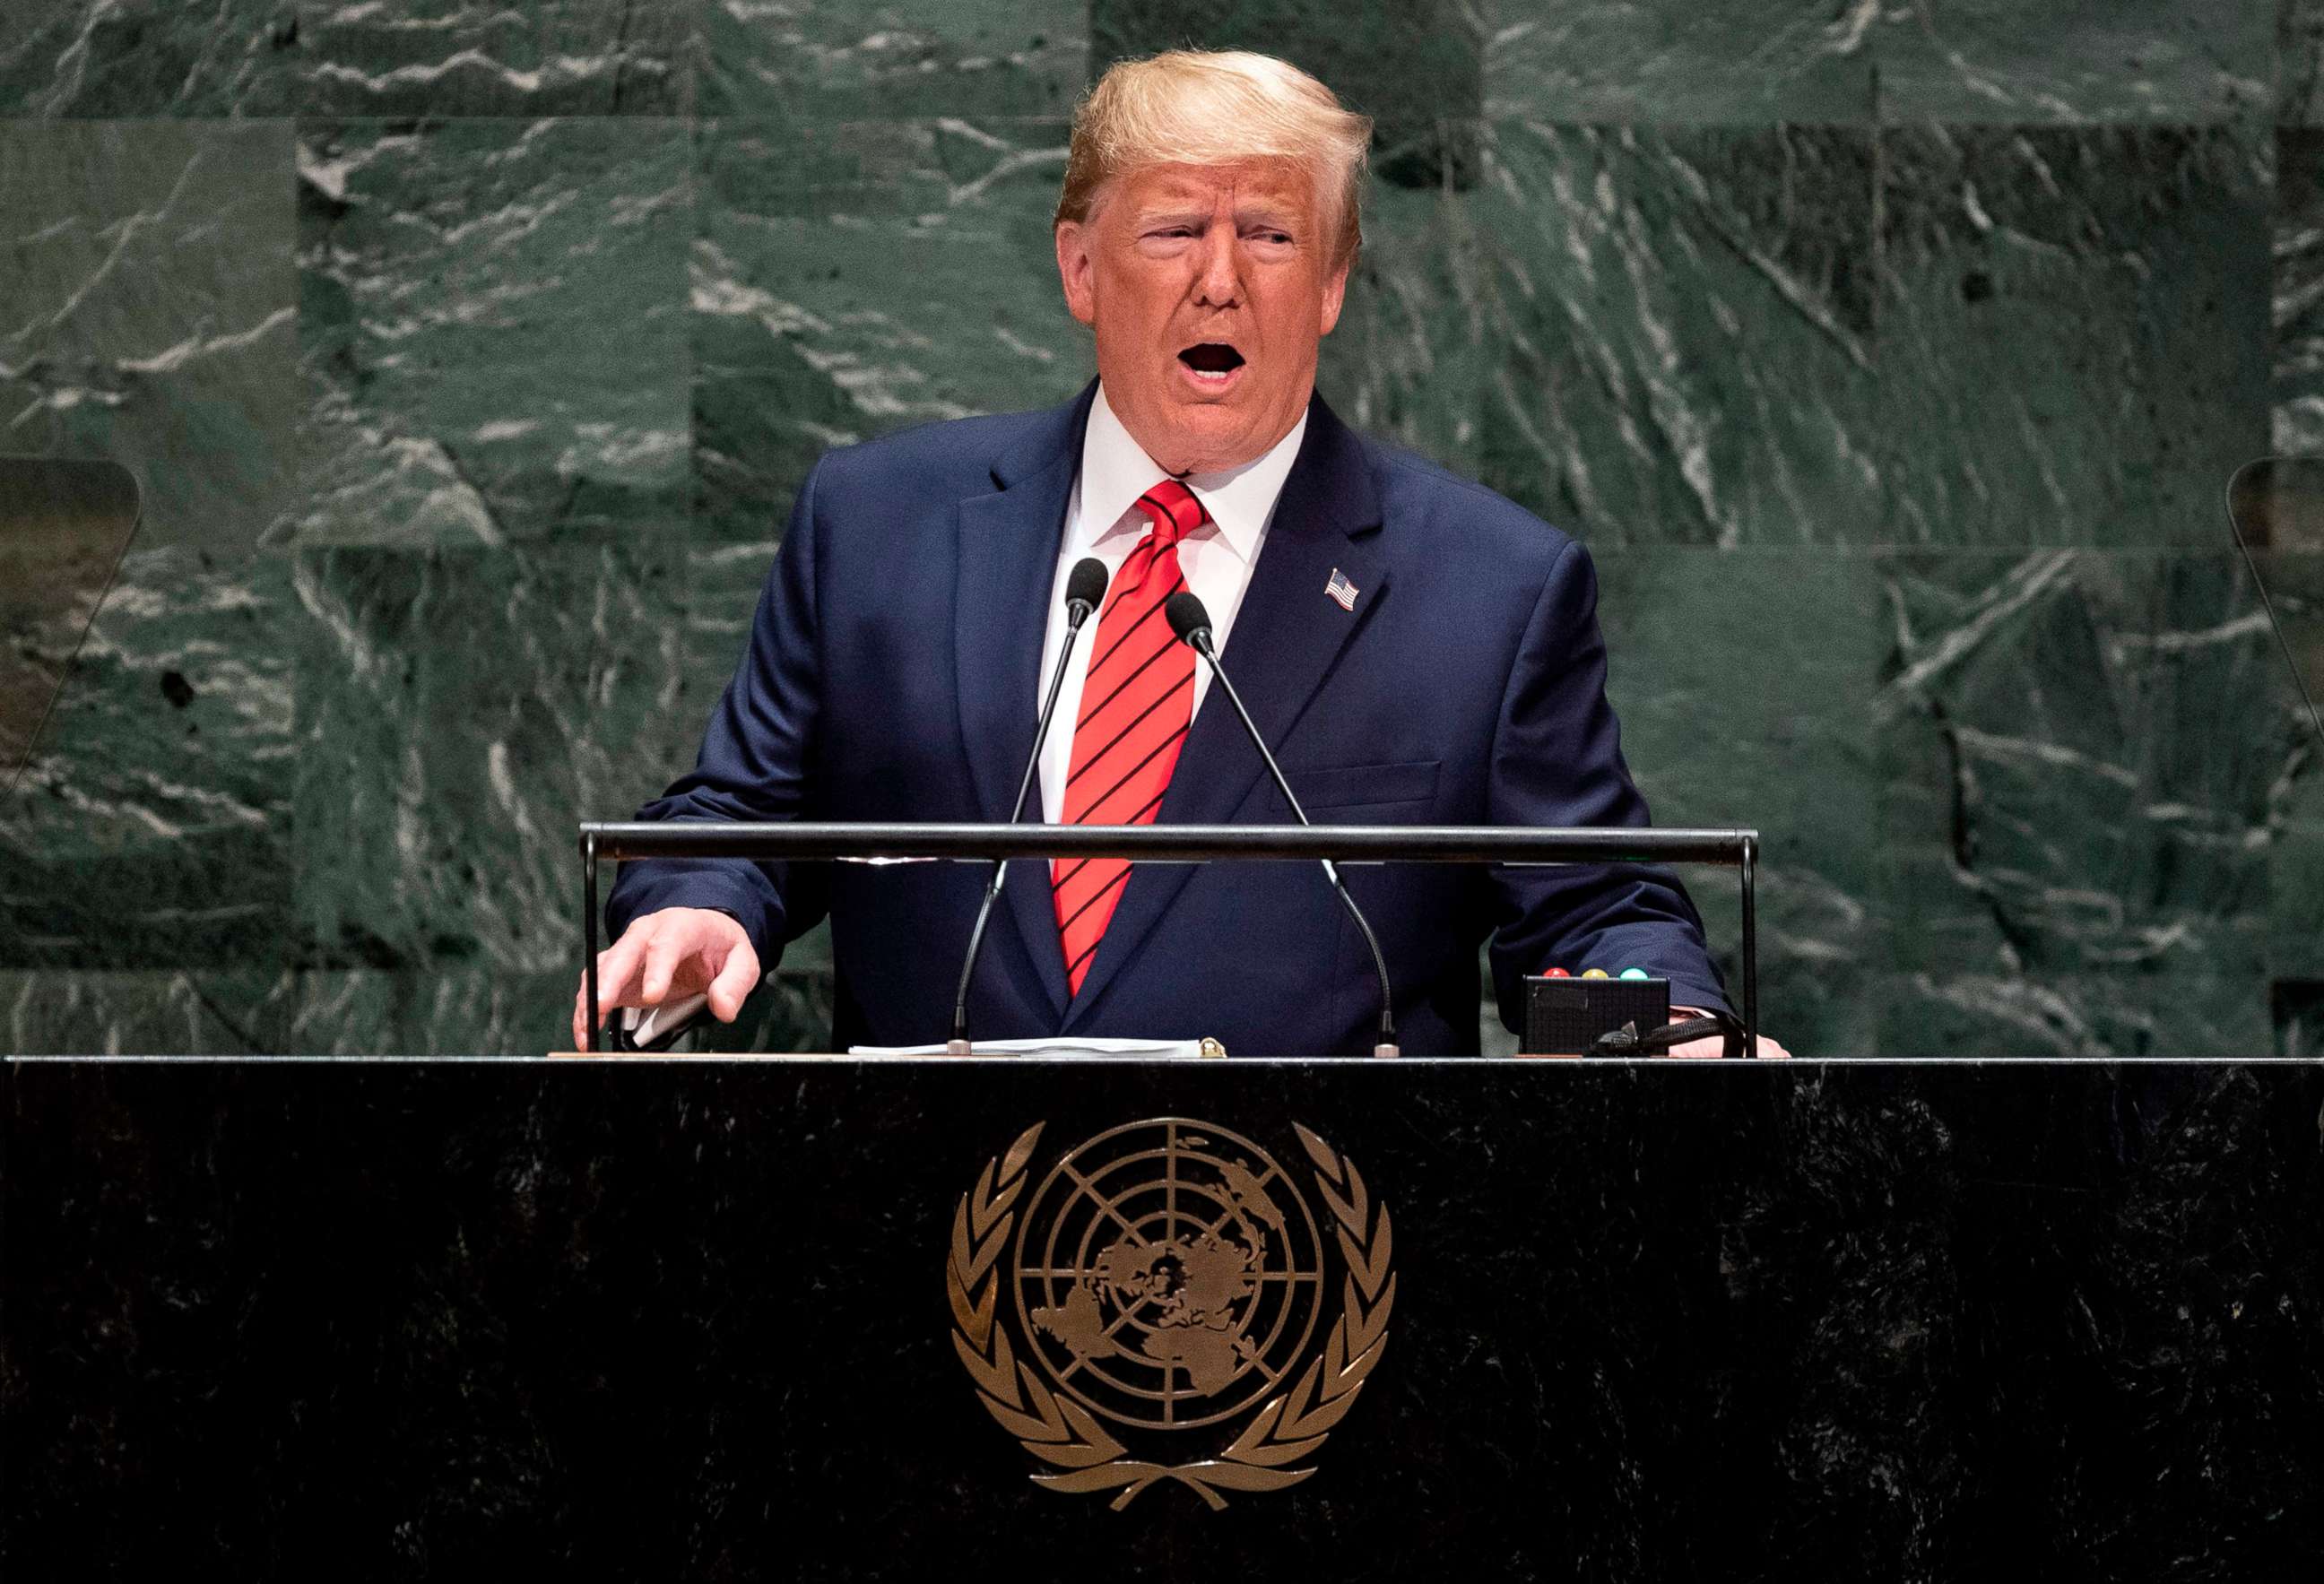 PHOTO: President Donald Trump speaks during the 74th Session of the United Nations General Assembly at UN Headquarters in New York, Sept. 24, 2019.